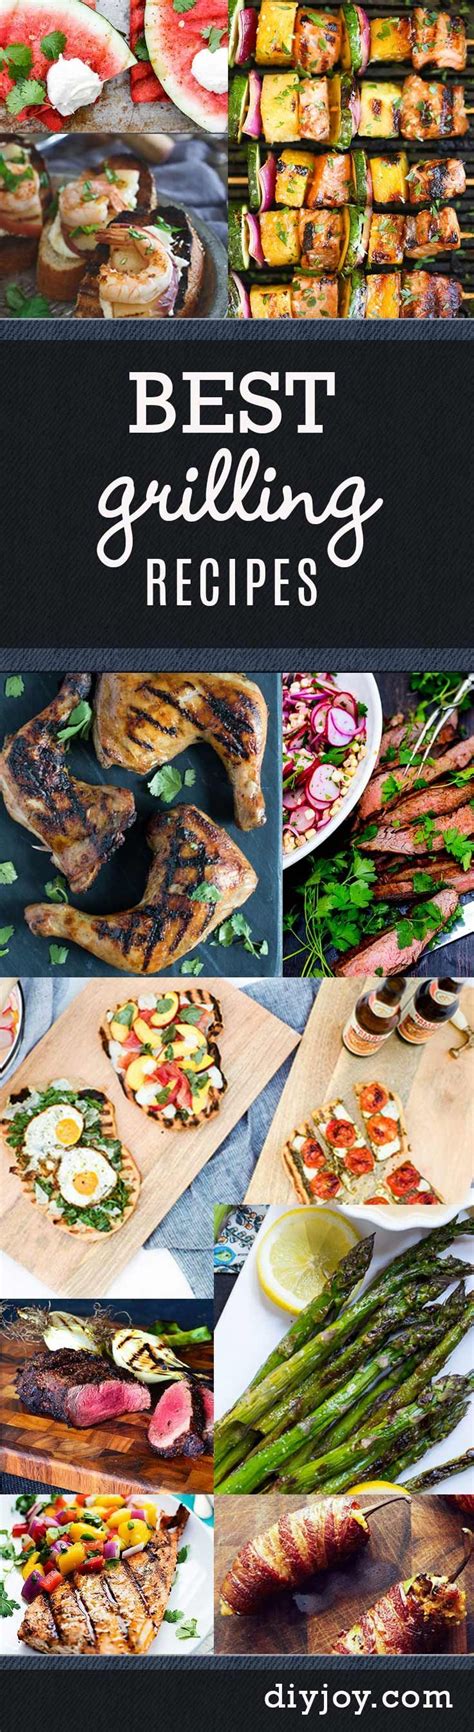 50 Best Grilling Recipes For Your Next BBQ DIY Joy Grilling Recipes